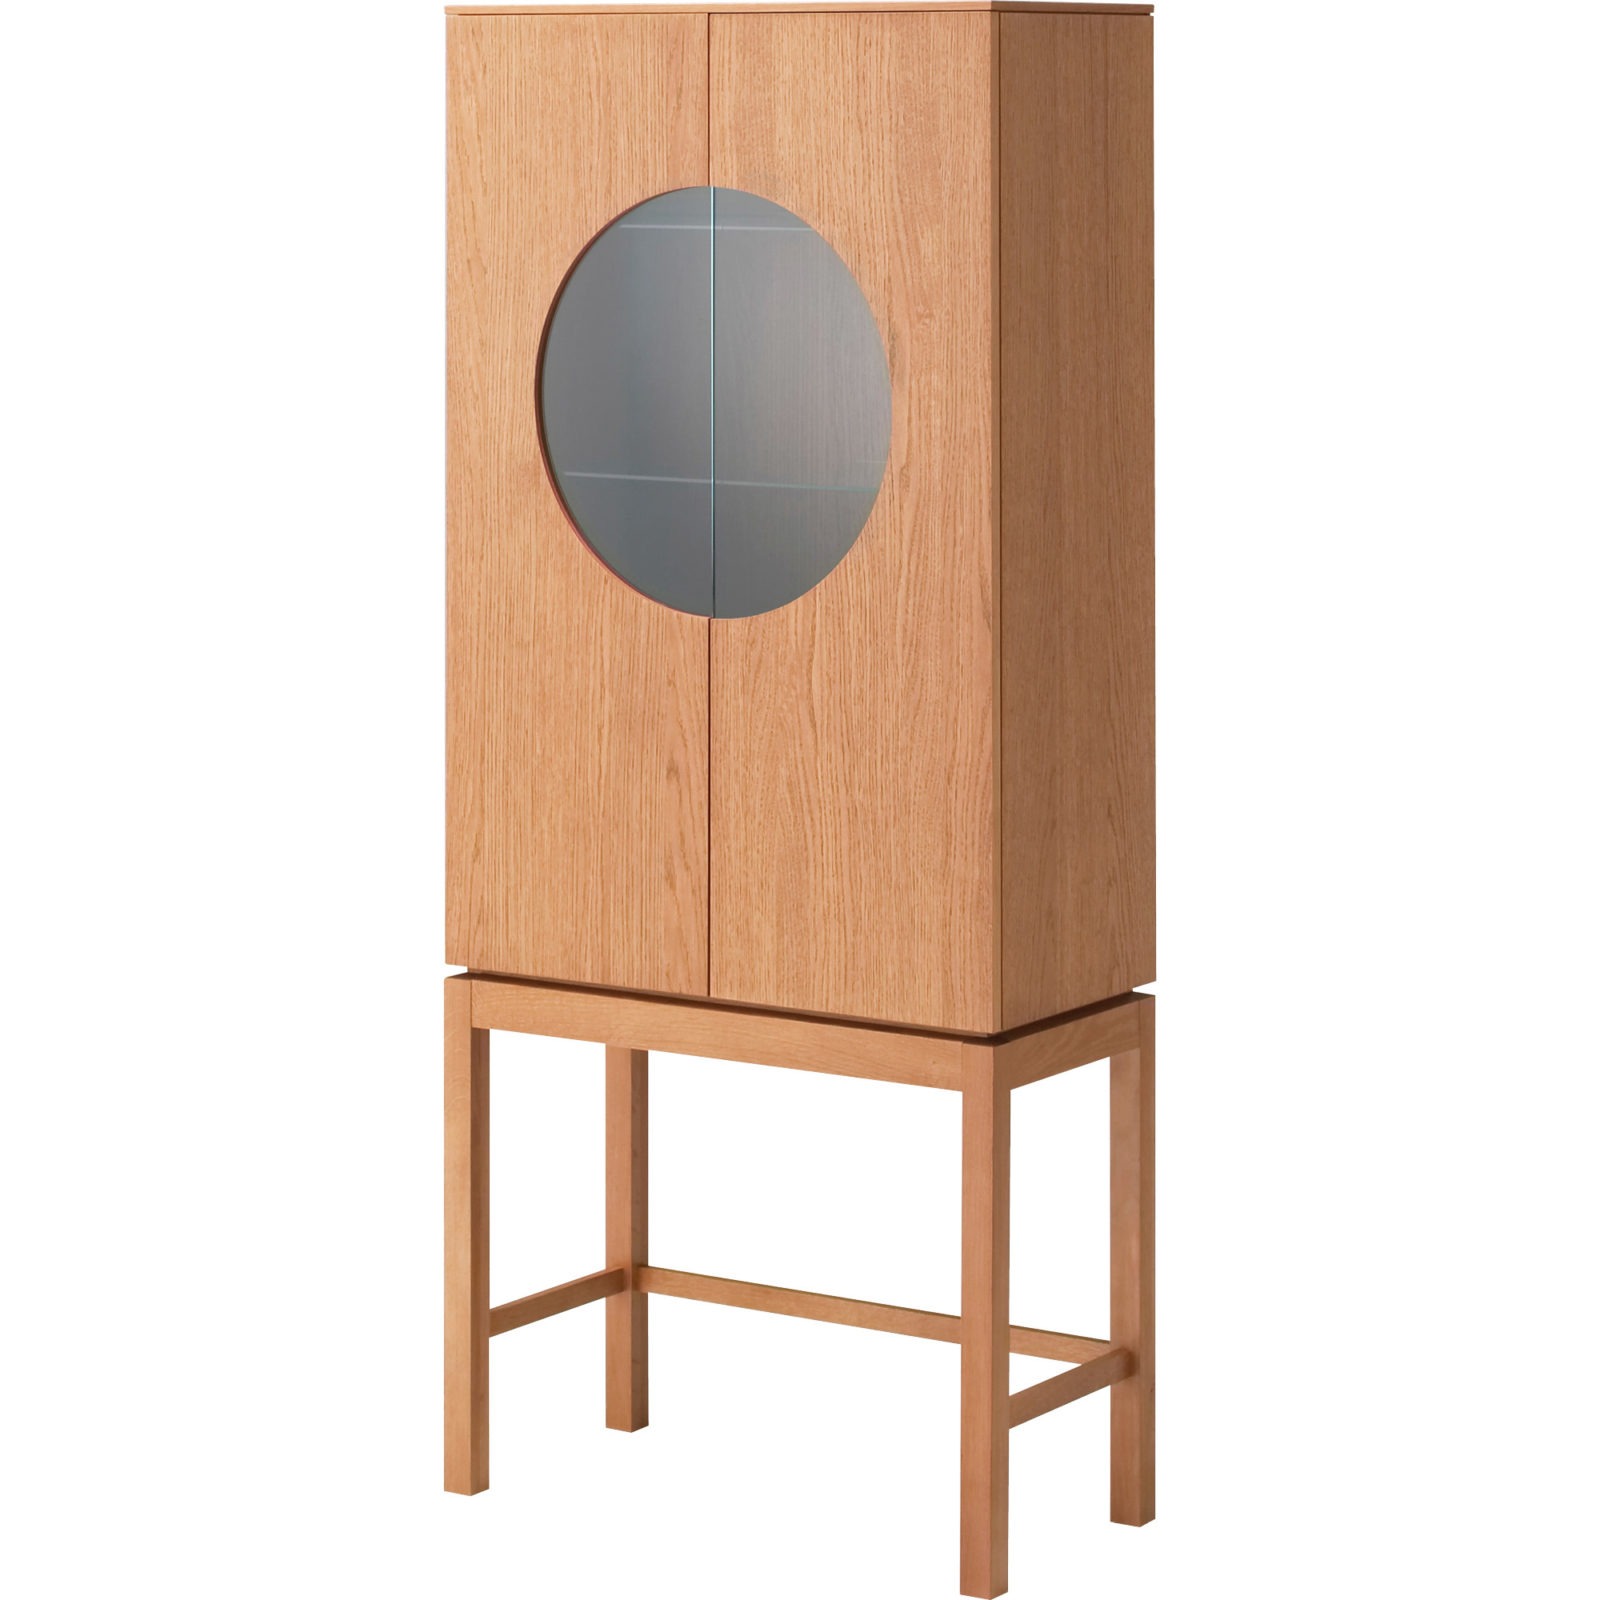 Read about the STOCKHOLM cabinet from 2006, designed by Tomas Jelinek, made of golden-brown stained, clear-lacquered oak veneer and solid oak.